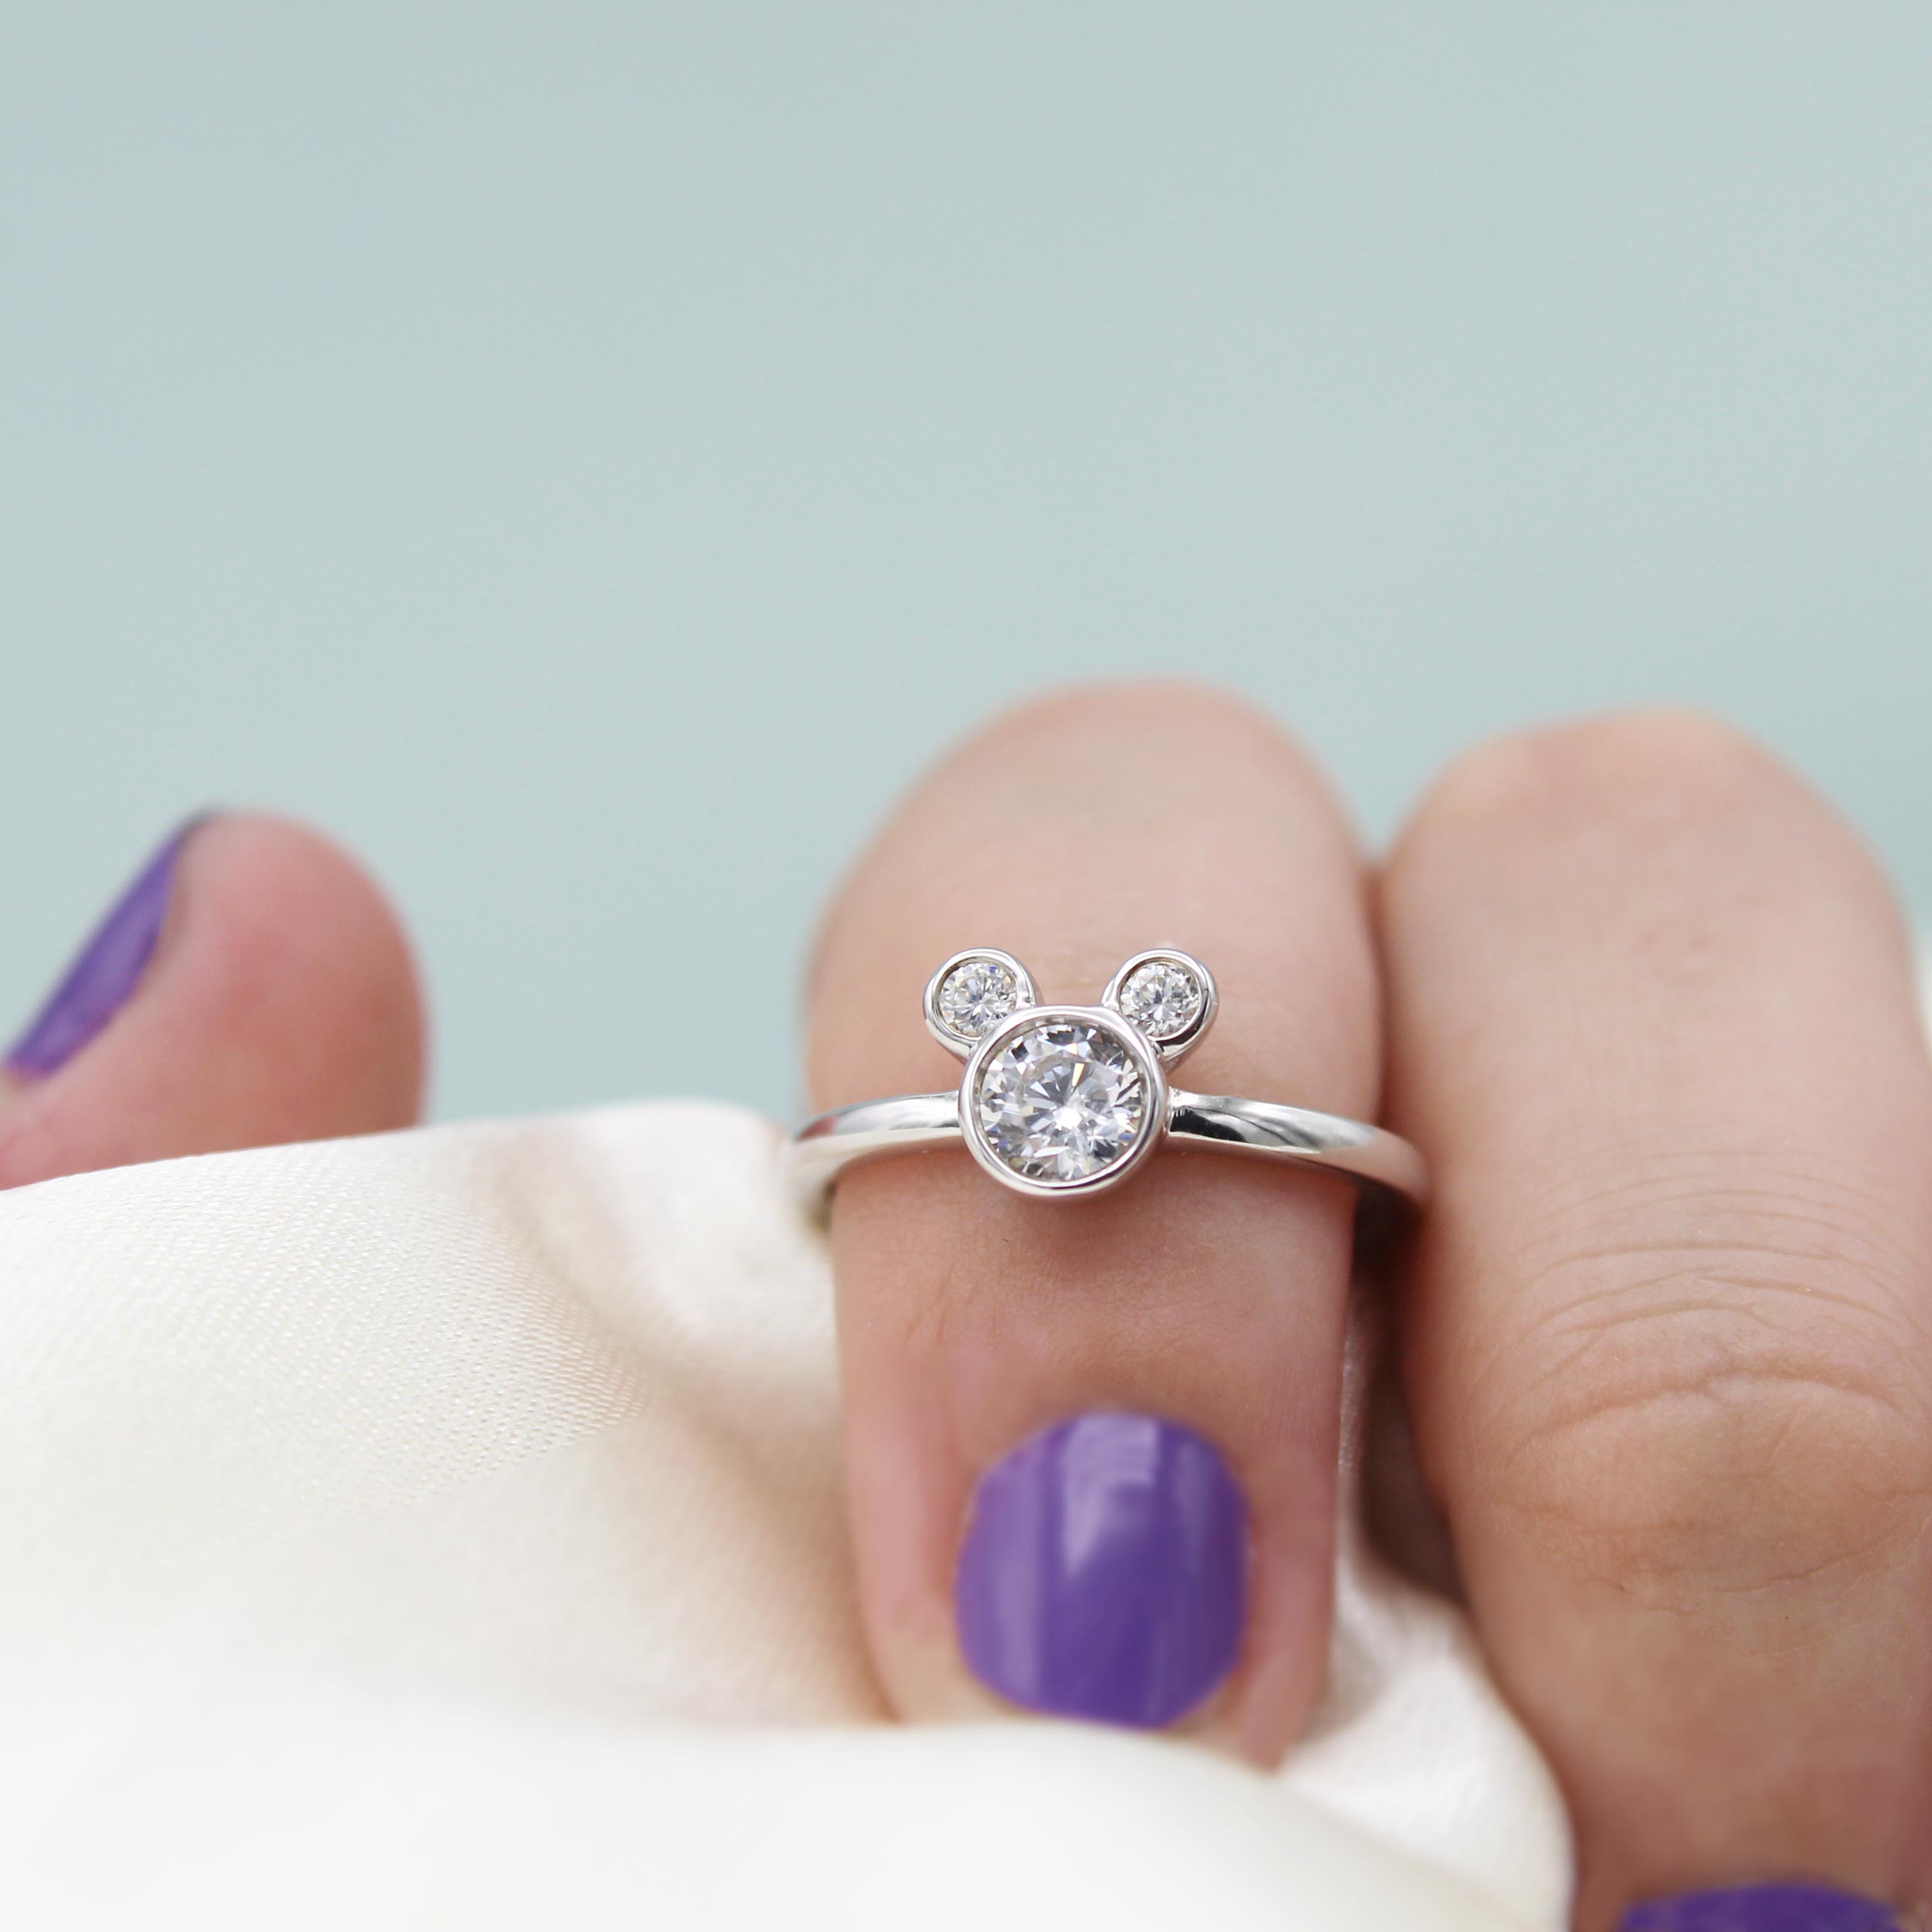 Mickey Mouse Ring, Mickey Mouse Jewelry, Mickey Ring, Minnie Mouse